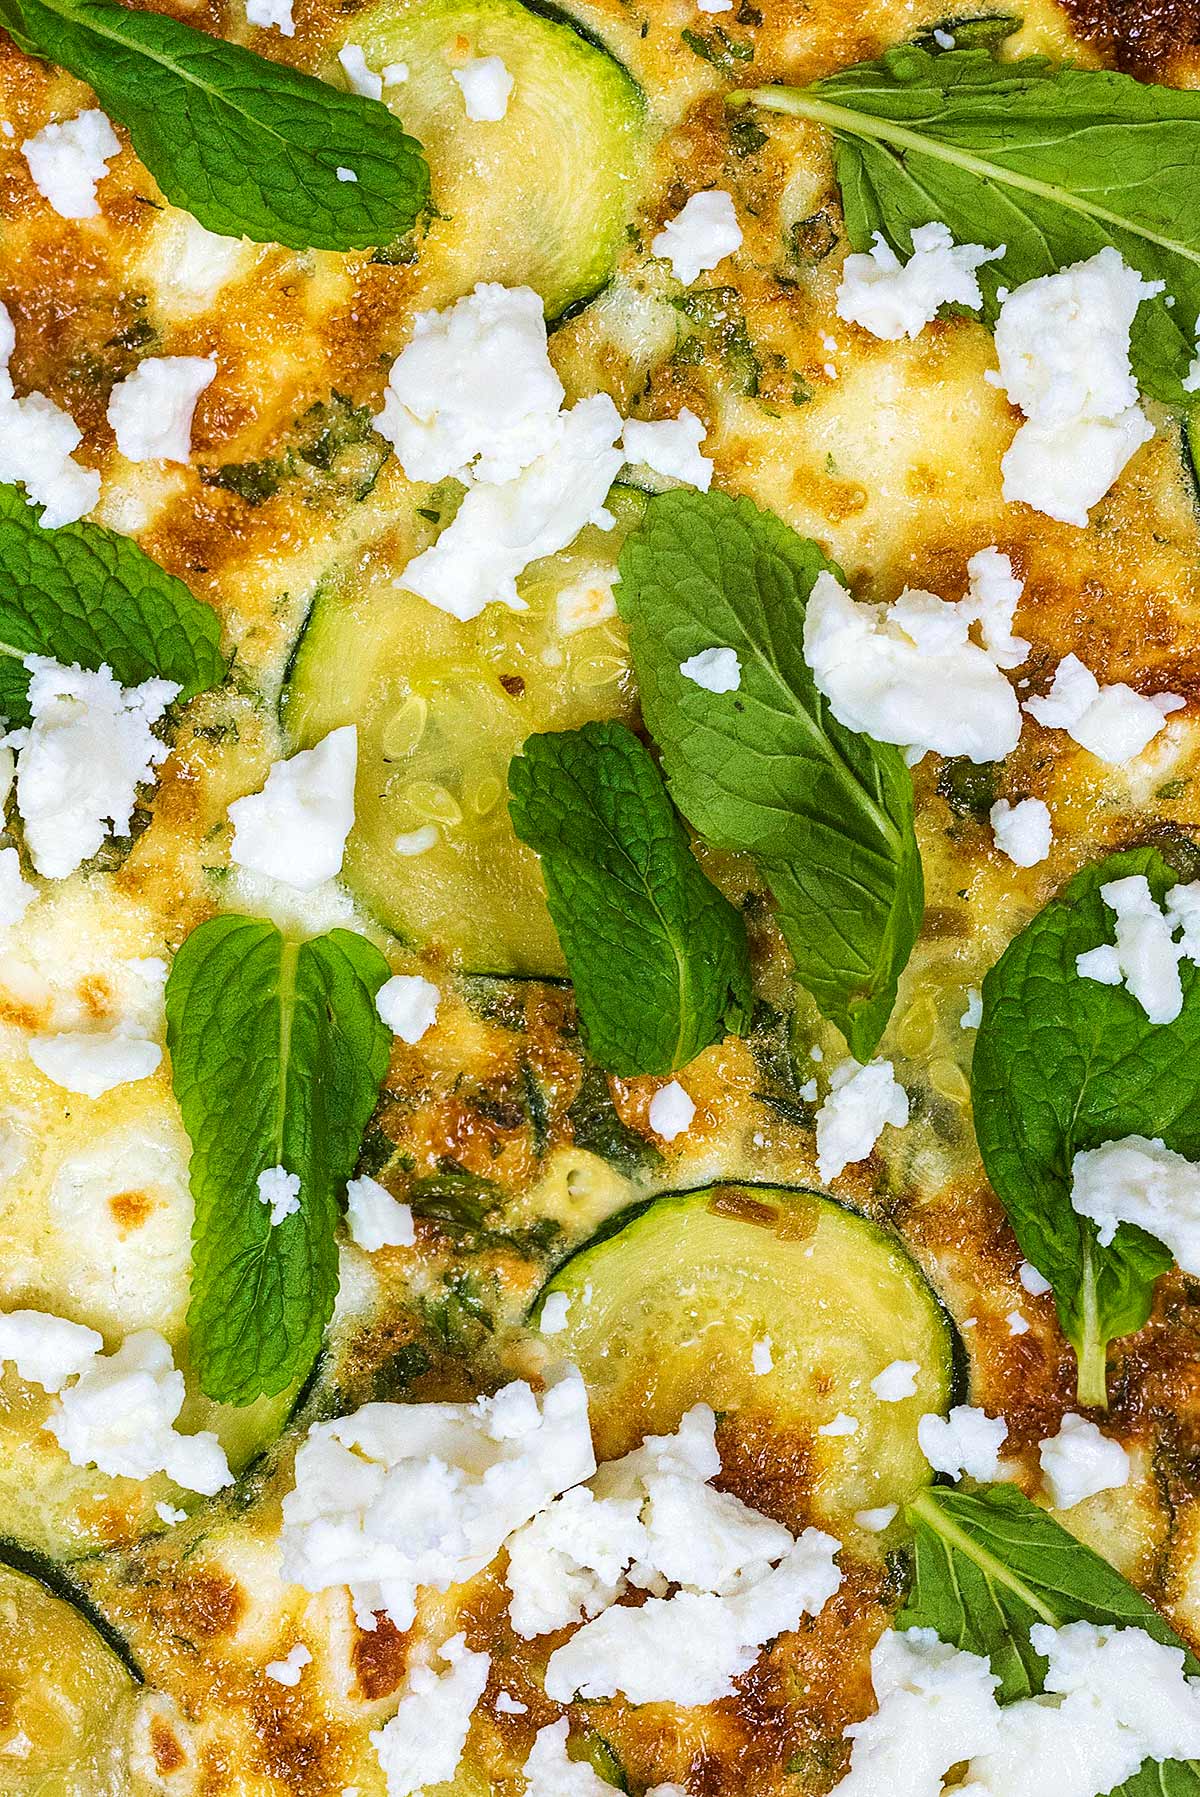 Slices of courgette in a frittata topped with mint leaves and crumbled feta.